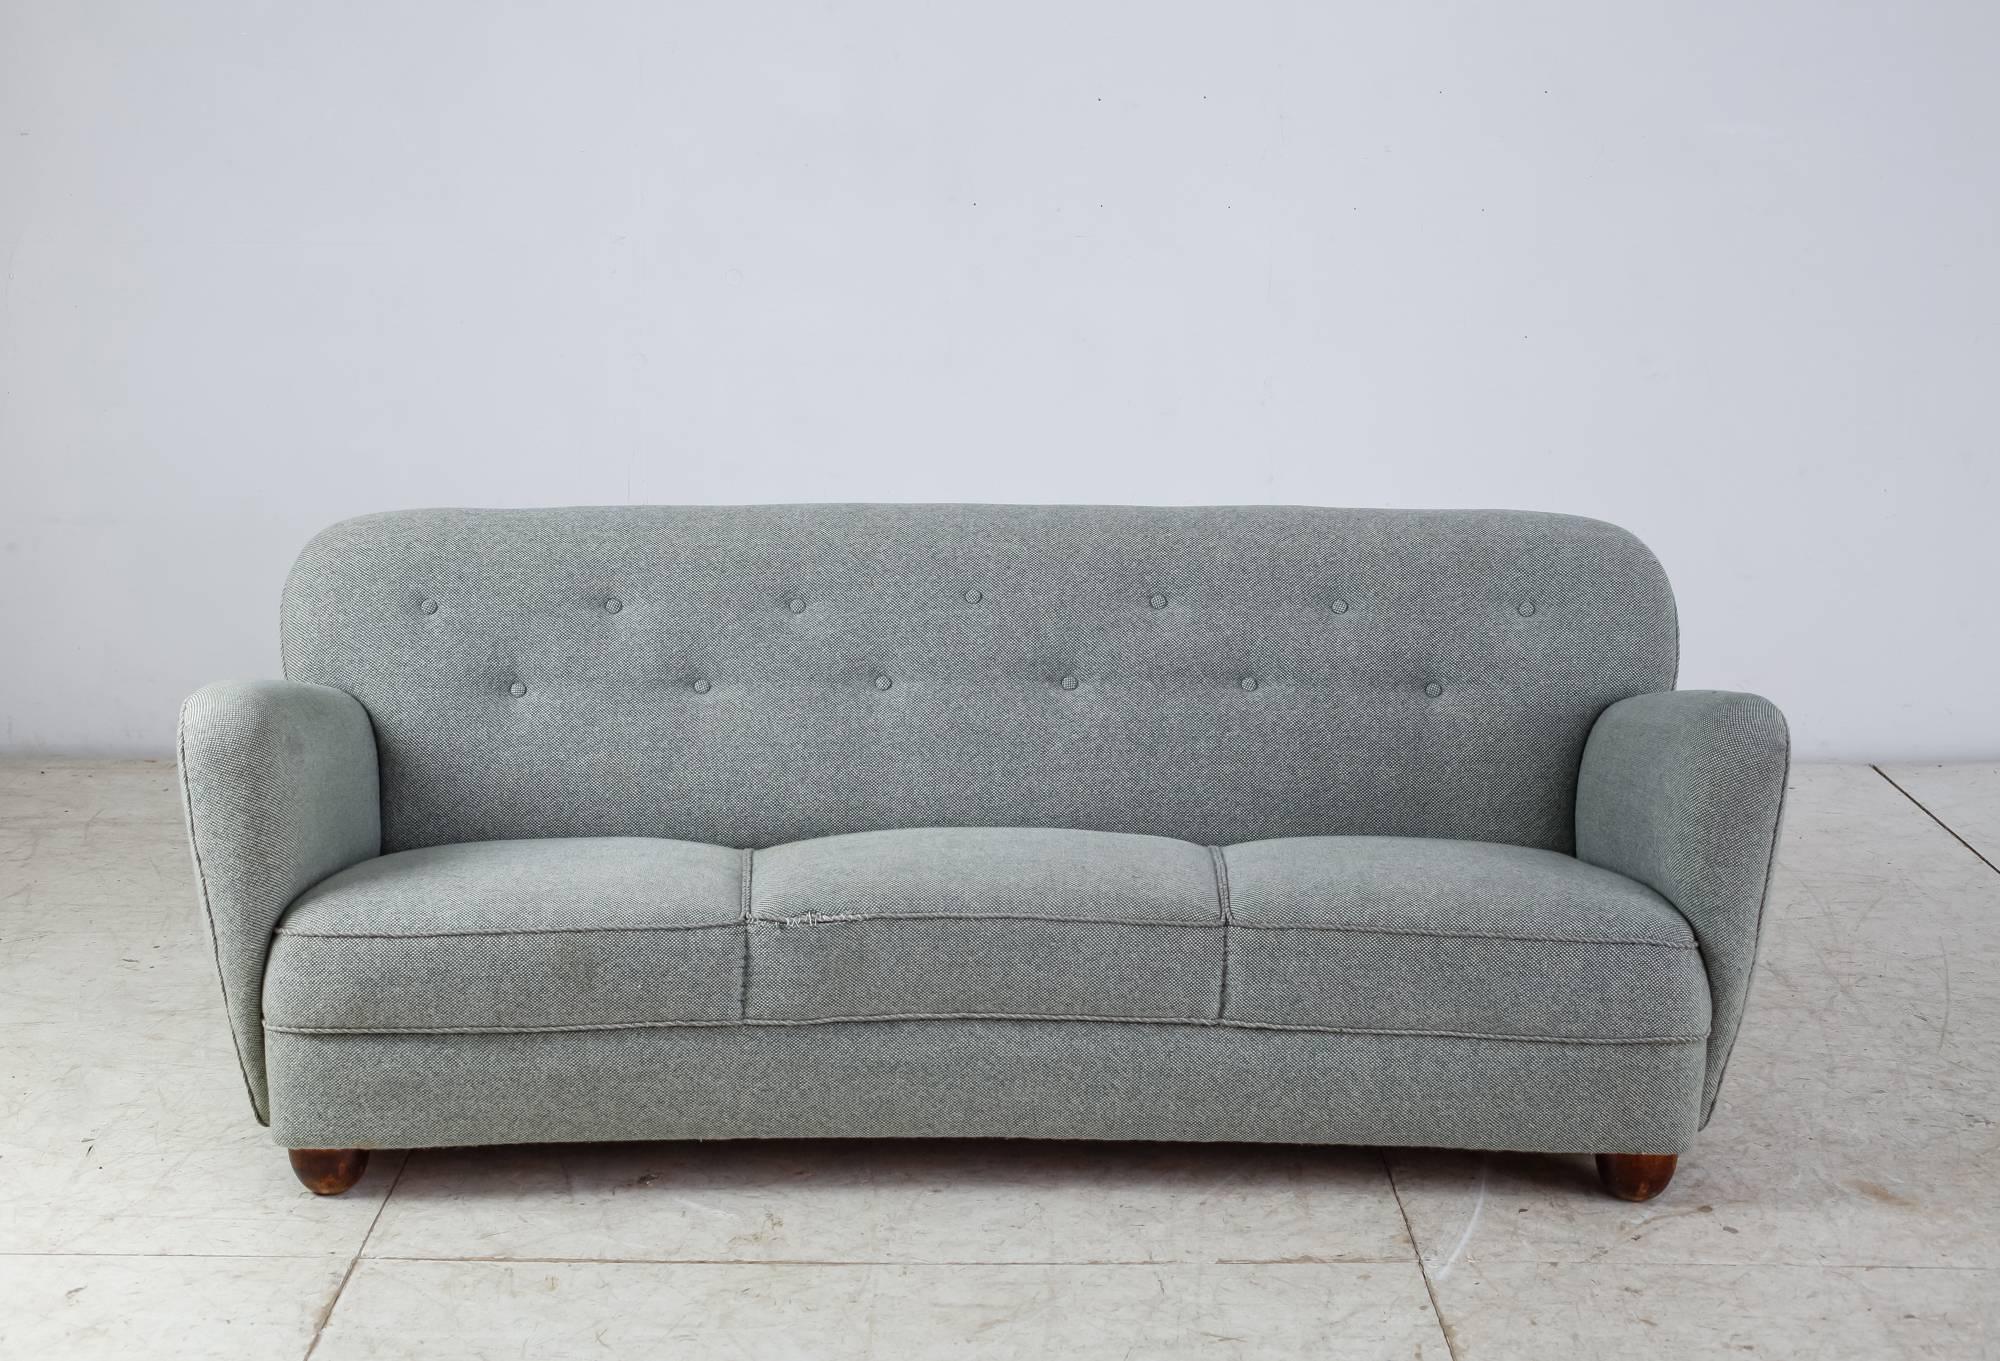 Scandinavian Modern Curved Three-Seat Sofa with Light Blue Fabric Upholstery, Denmark, 1930s For Sale